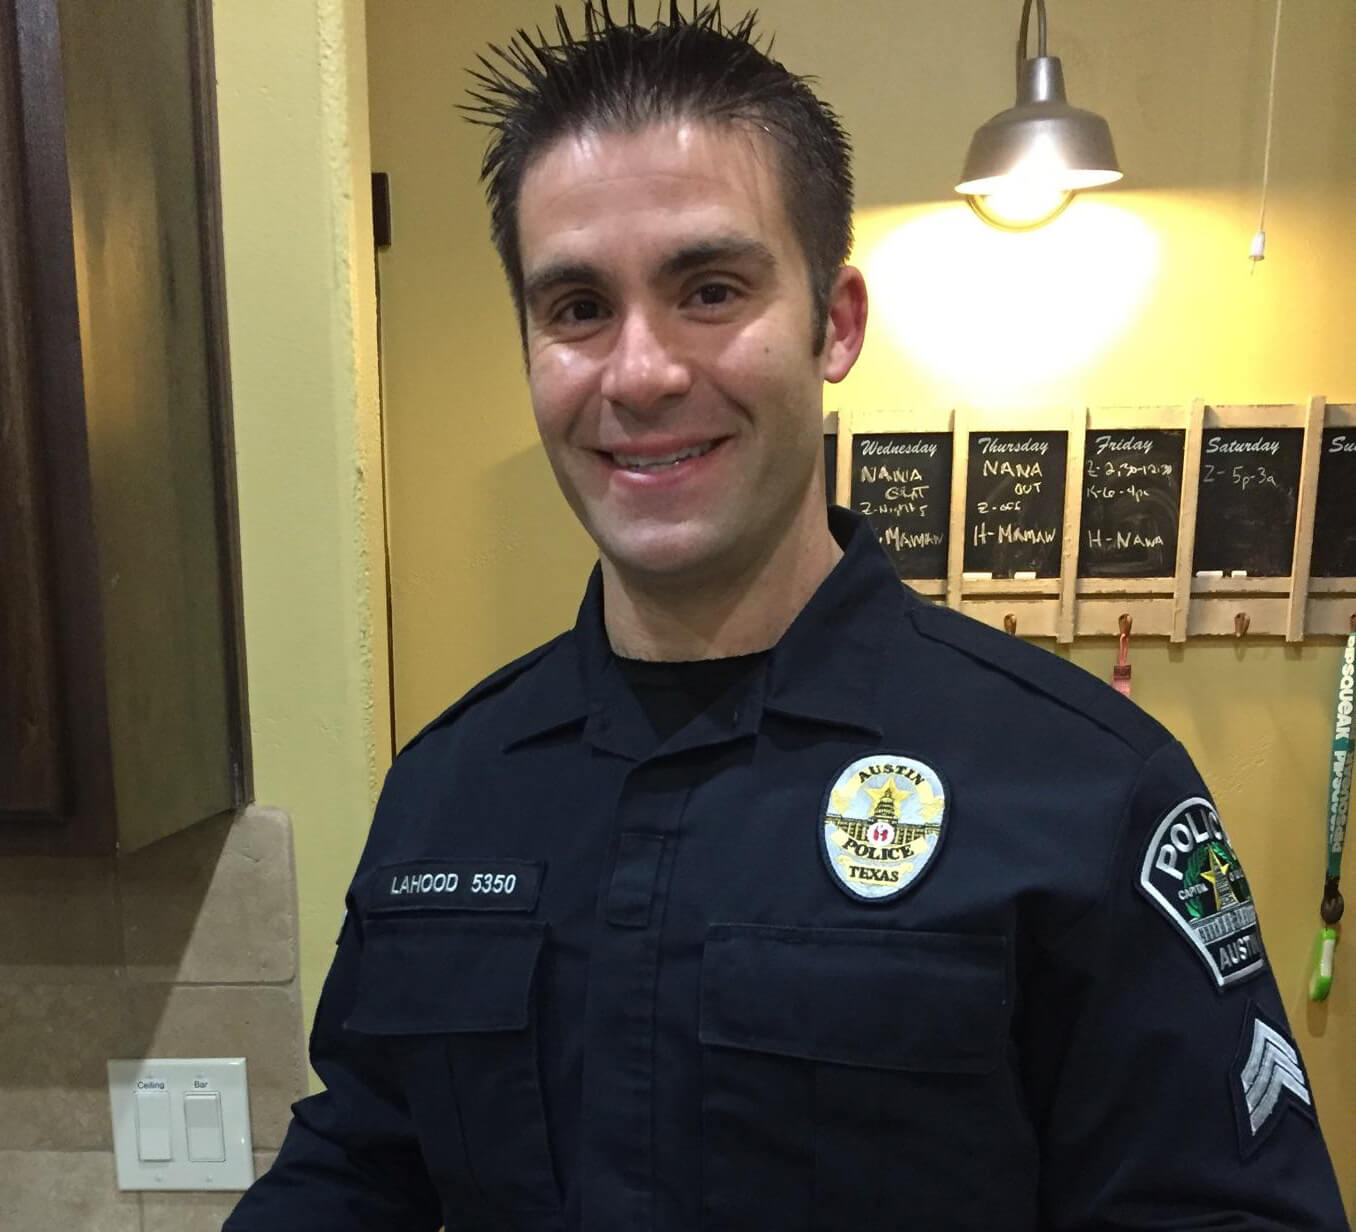 sergeant zachary lahood poisoned by carbon monoxide ford explorer austin police